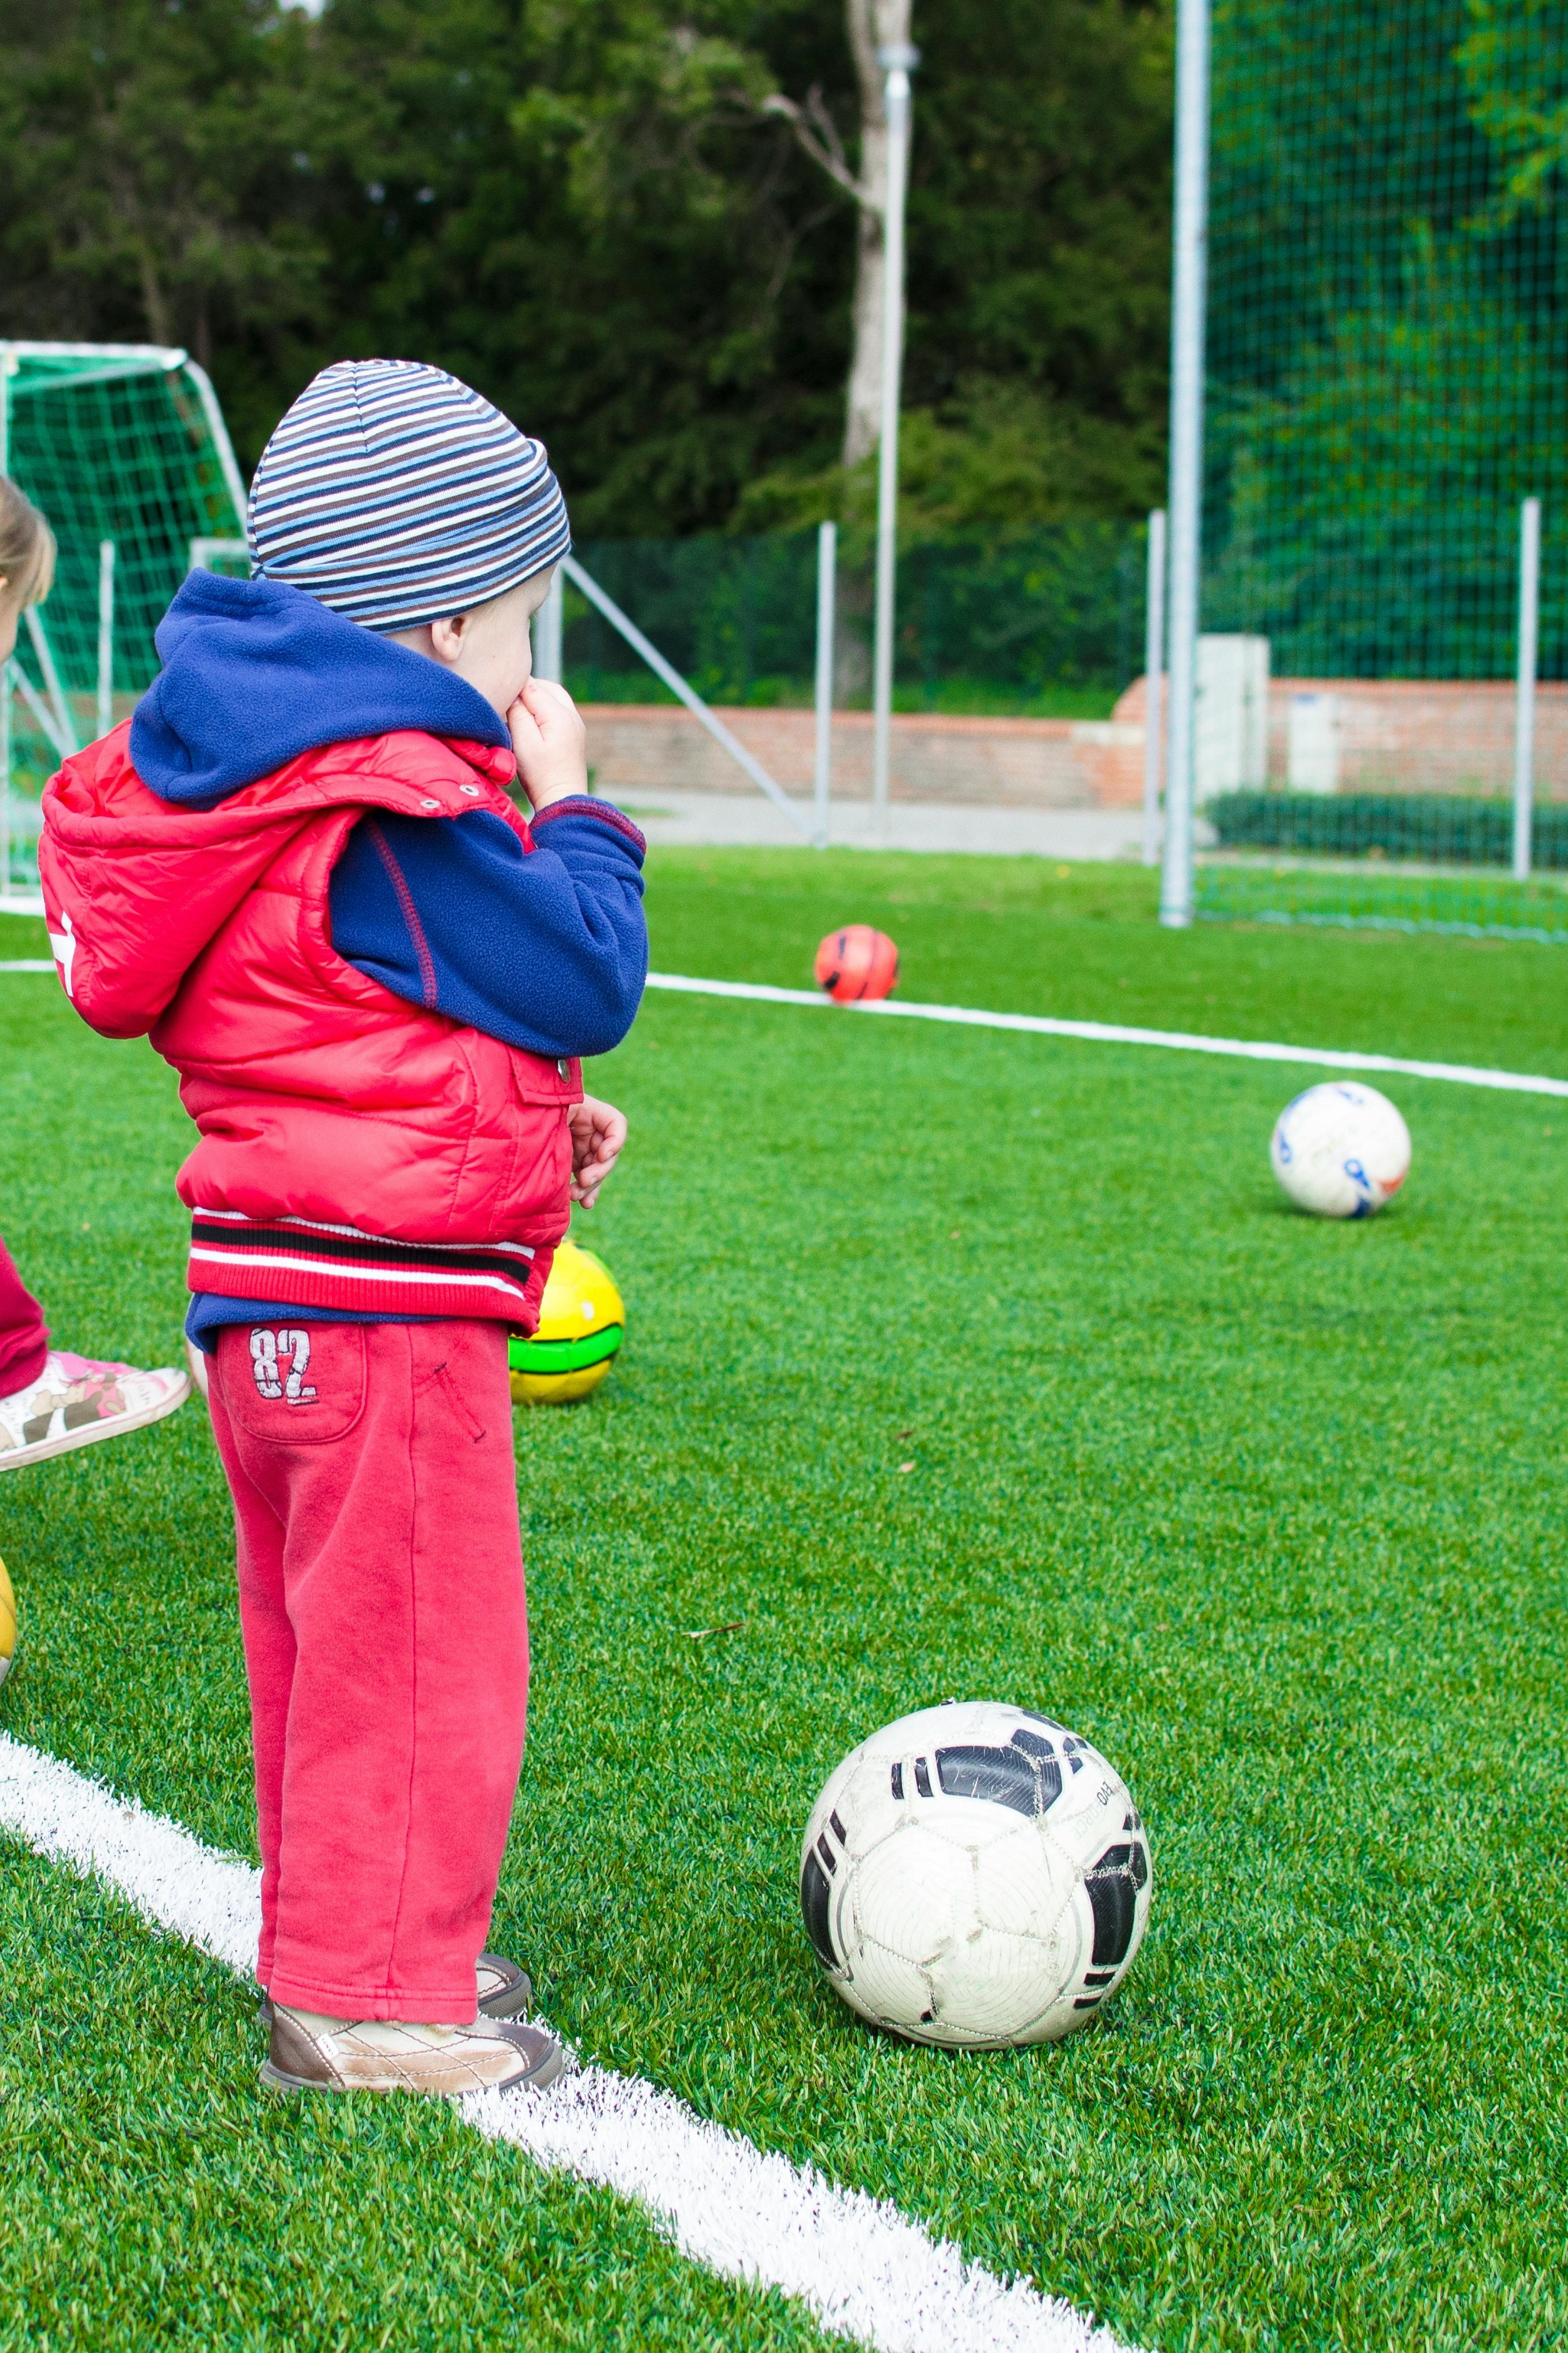 A toddler standing in front of a Soccer ball on a field.